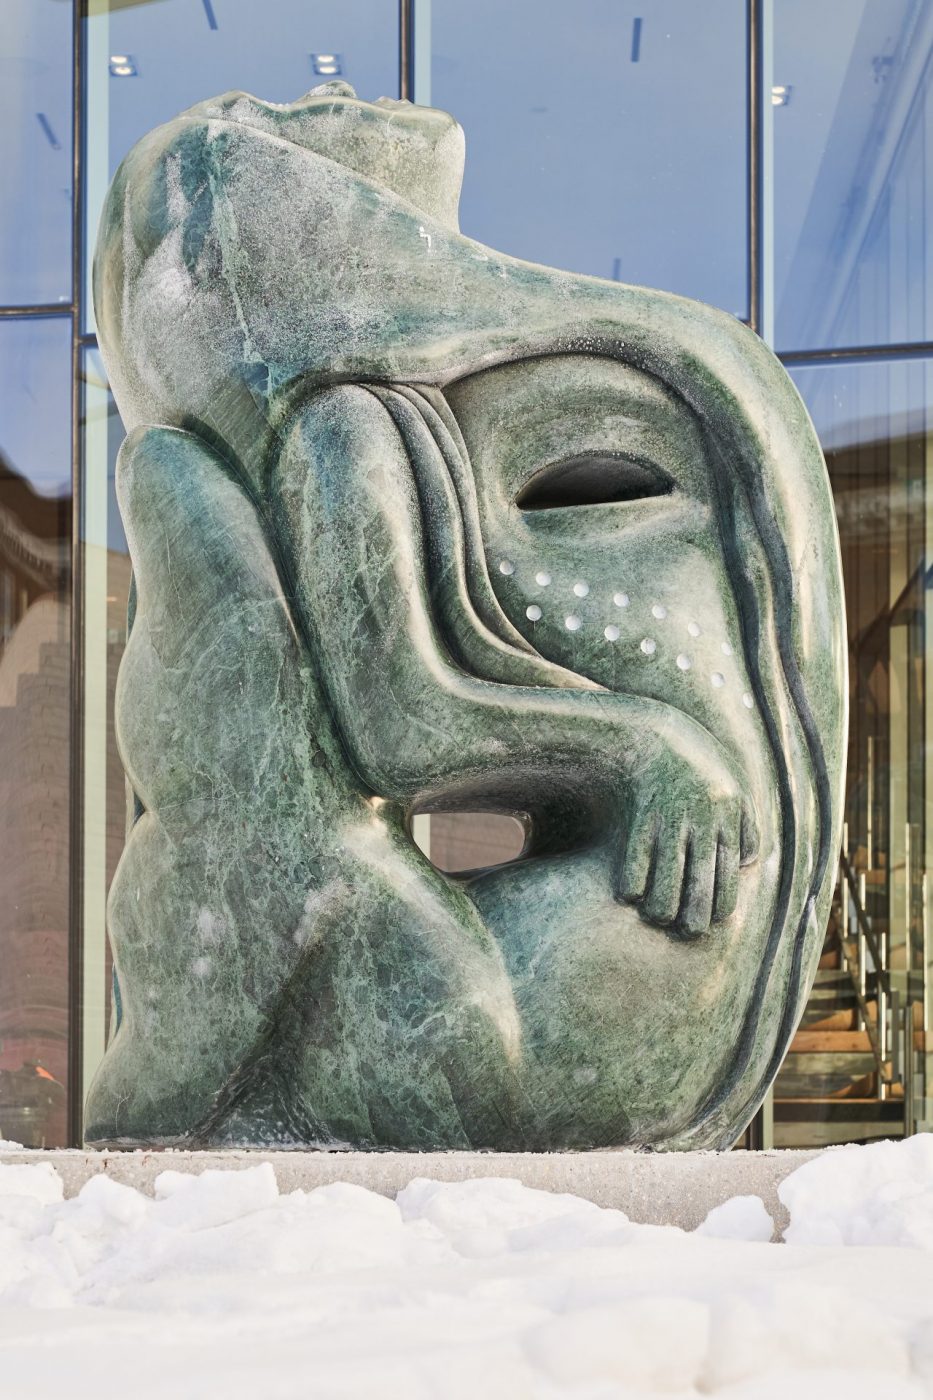 A green Verde Guatemala marble carving outside of the Winnipeg Art Gallery-Qaumajuq that depicts a mermaid.